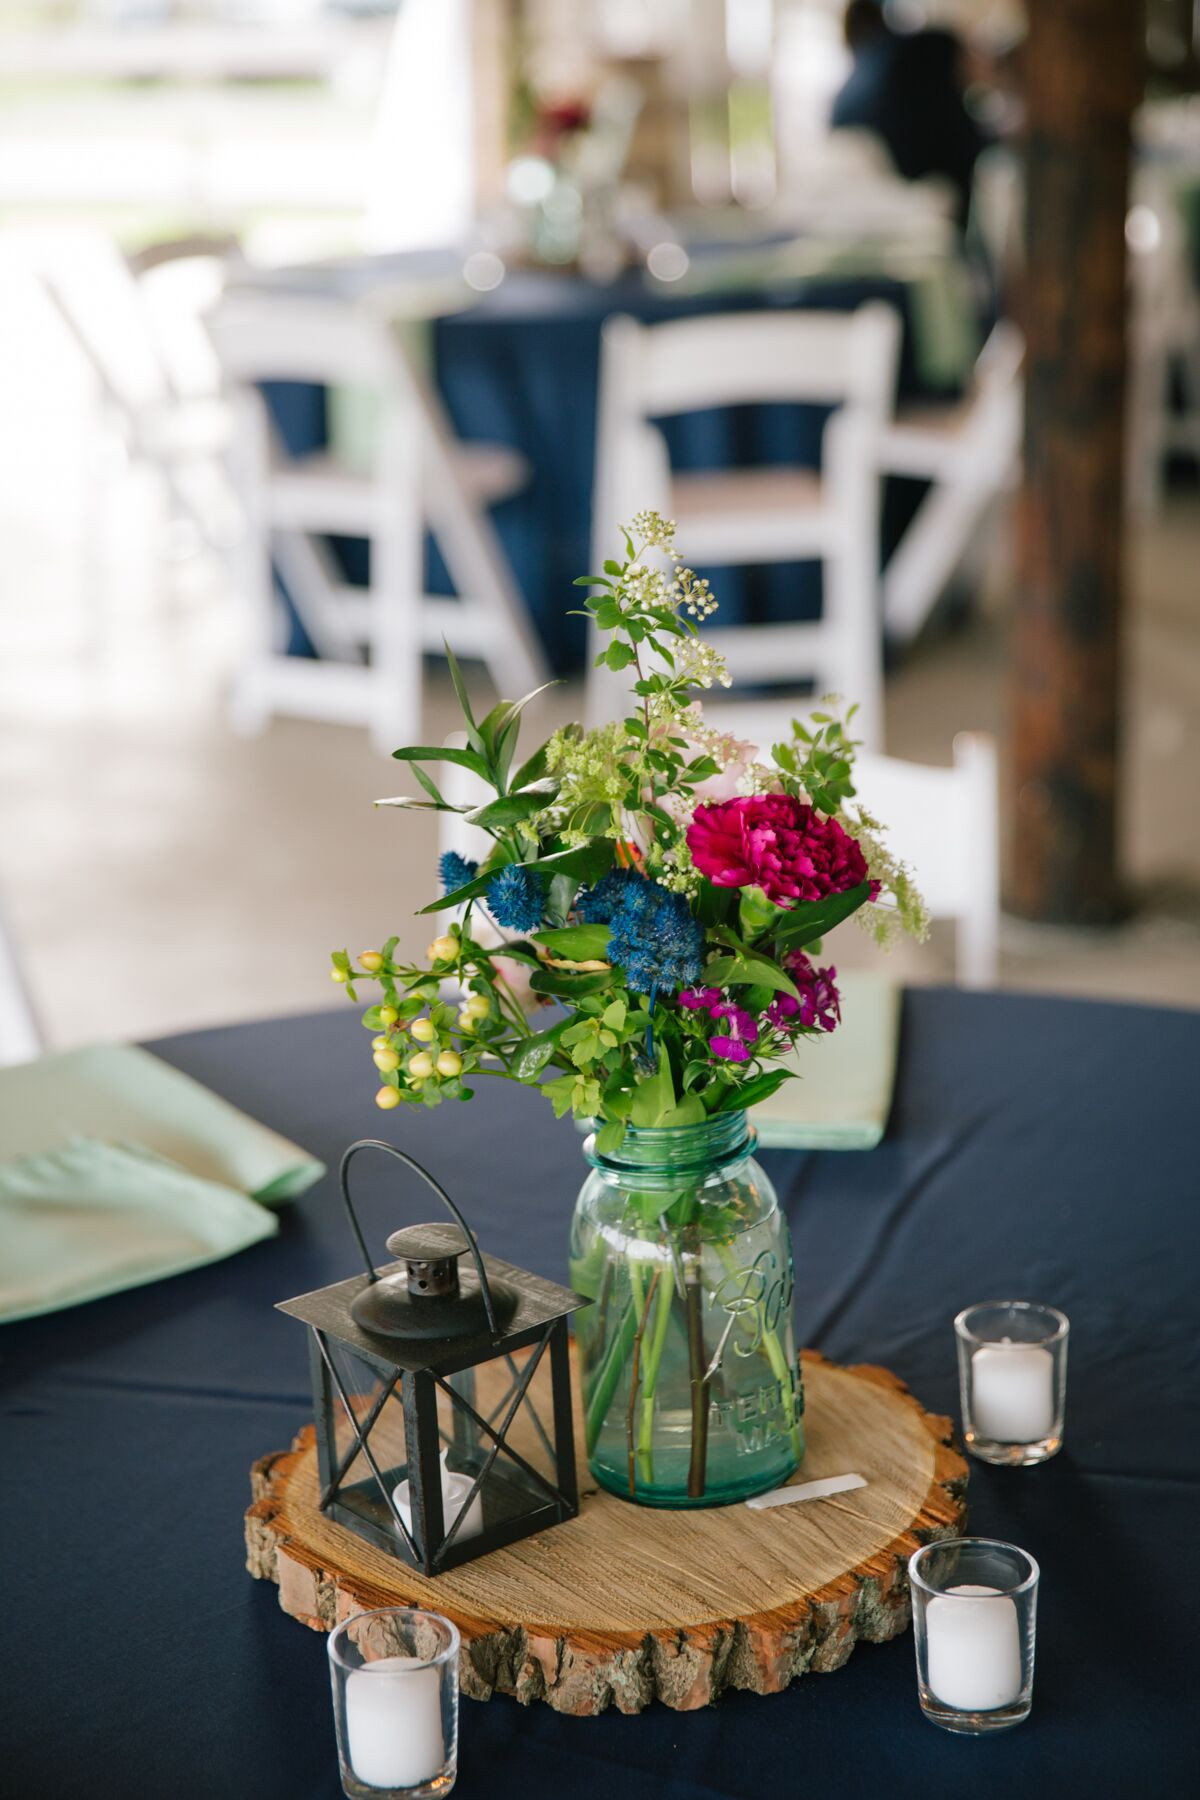 DIY Wood Slab Centerpieces
 DIY Wooden Slab Centerpieces With Jars and Flowers